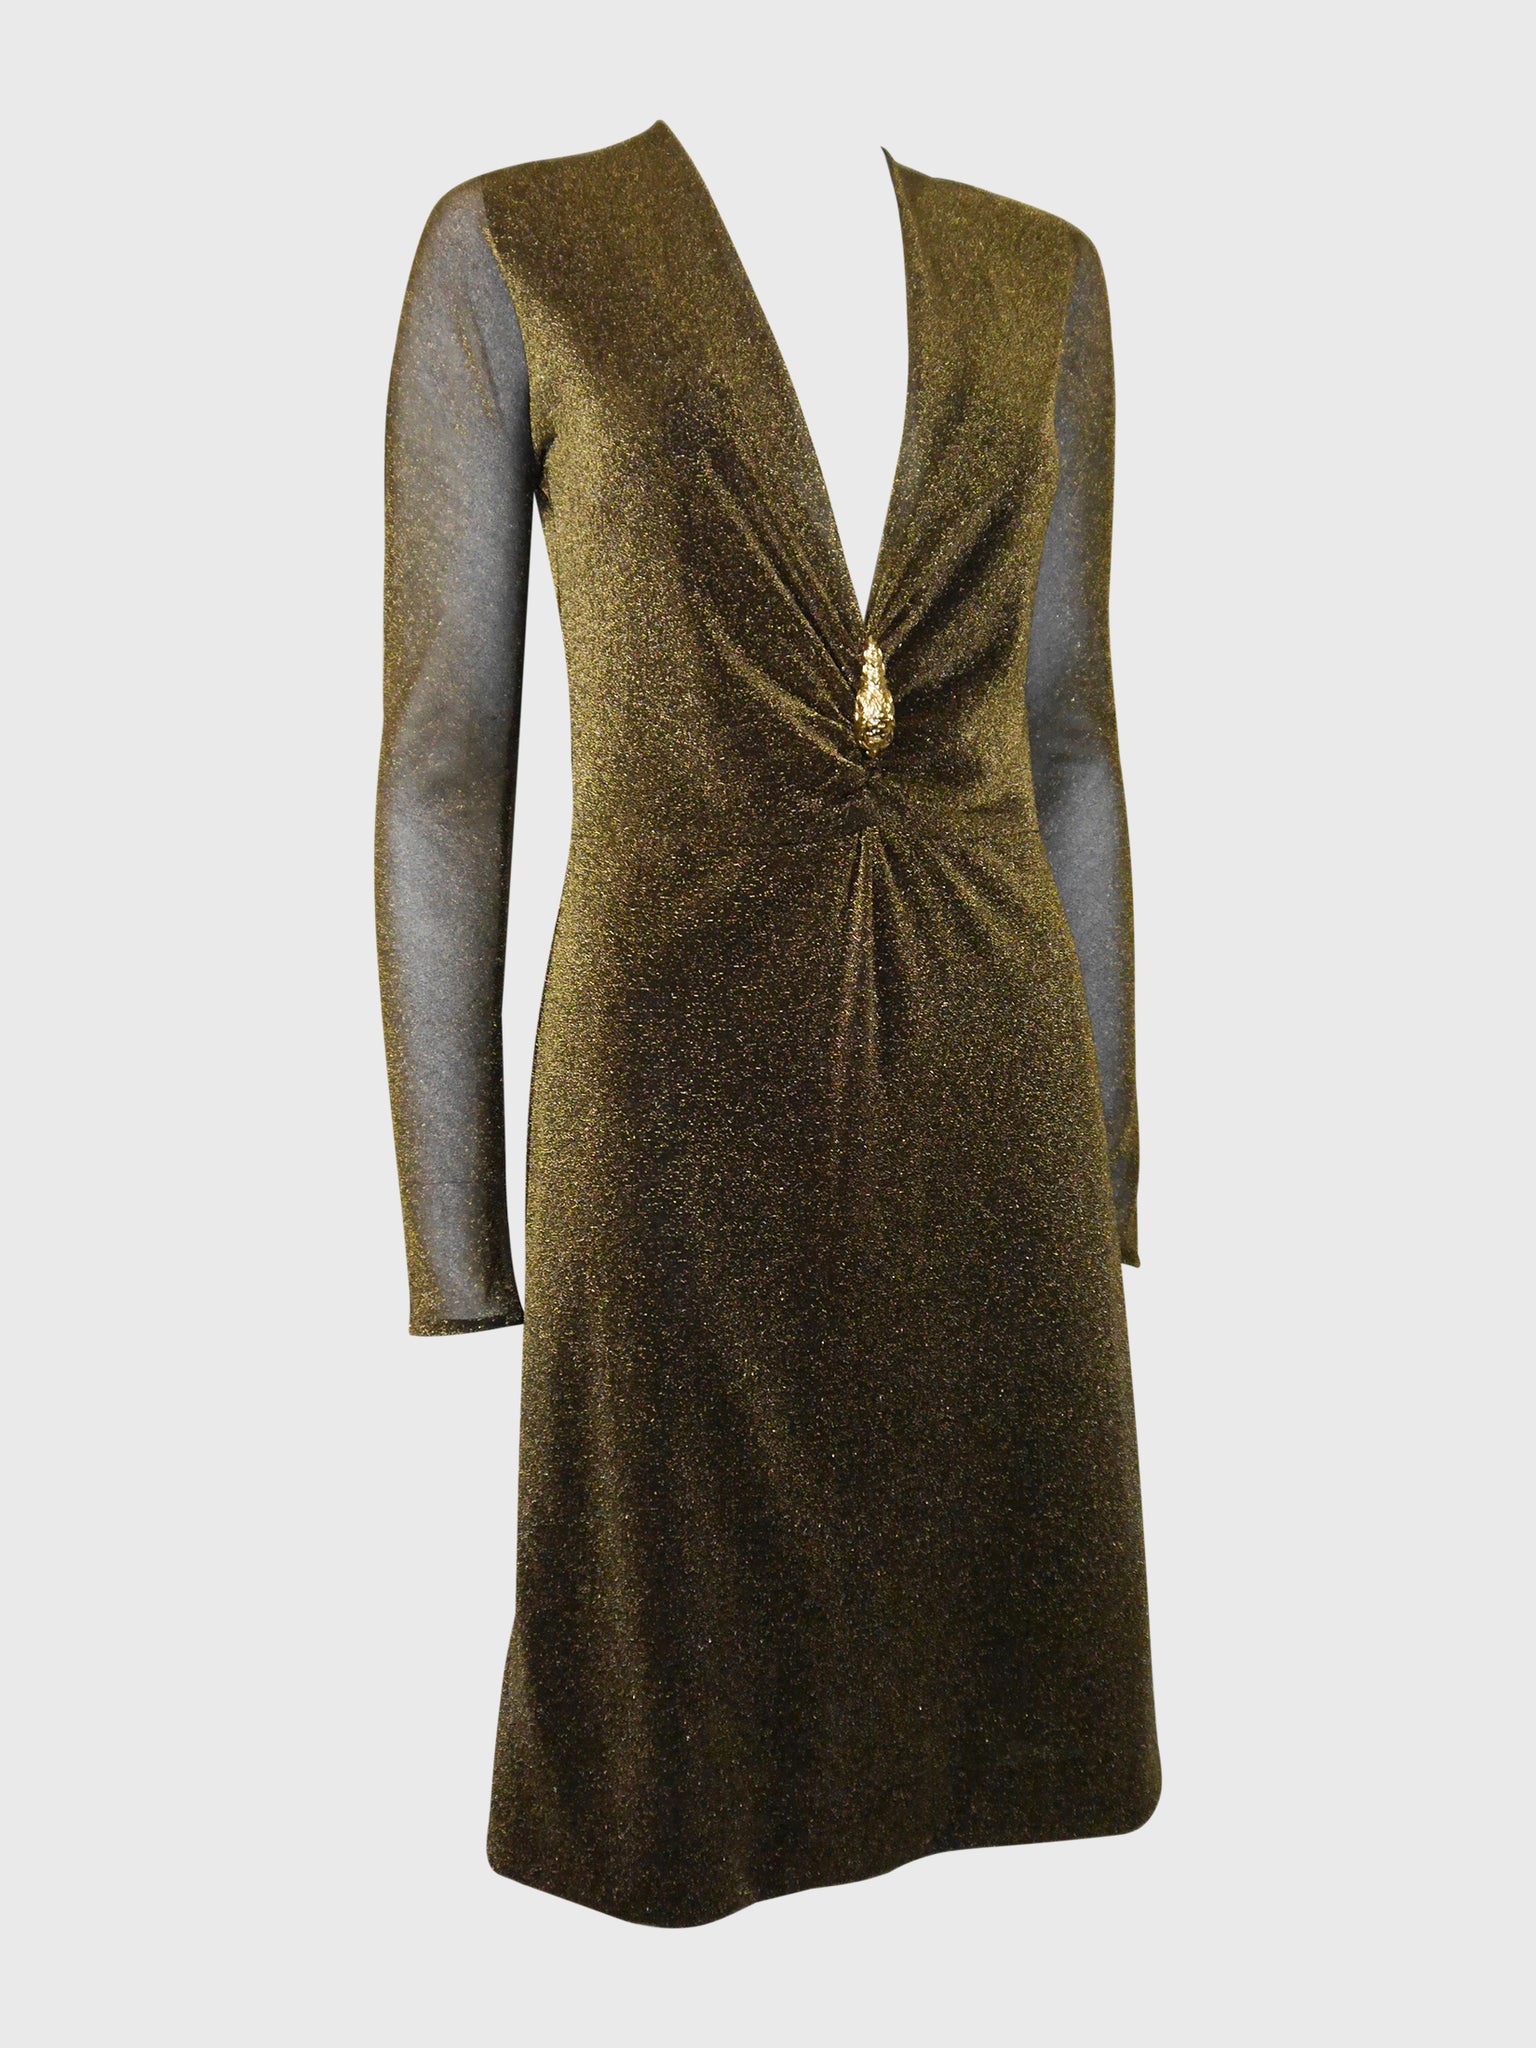 GUCCI by Tom Ford Fall 2000 Vintage Metallic Copper Lurex Plunge Dress Size XS